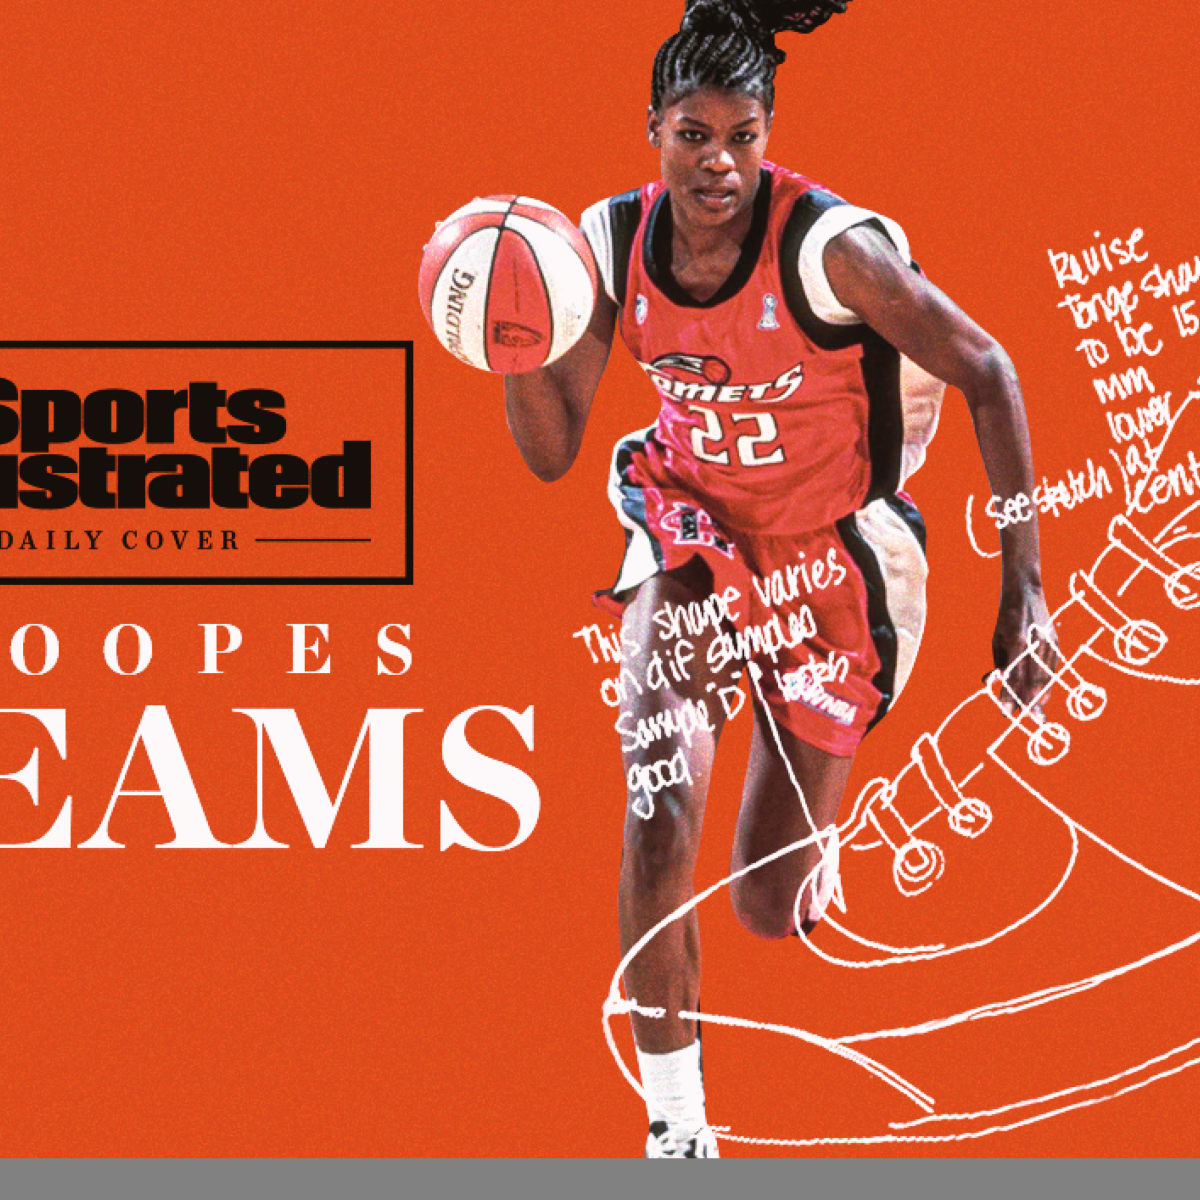 Sheryl Swoopes' Nike Air Swoopes 2 Drops in White/Red This Week -  WearTesters